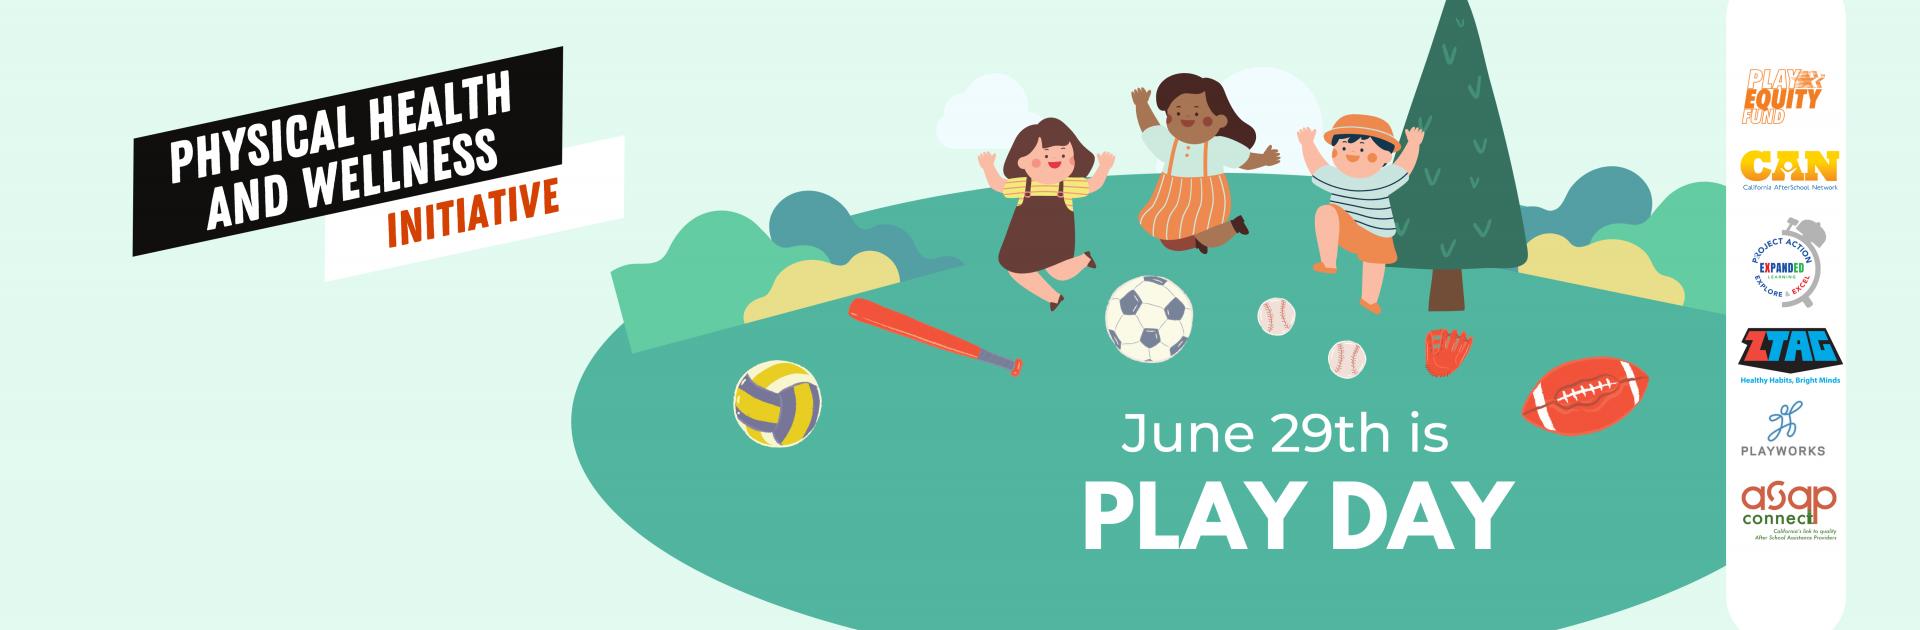 June 29th is Play Day with cartoon pictures of students playing on grass with sports equipment with a tree. Physical Health and Wellness Initiative and CAN and partner logos